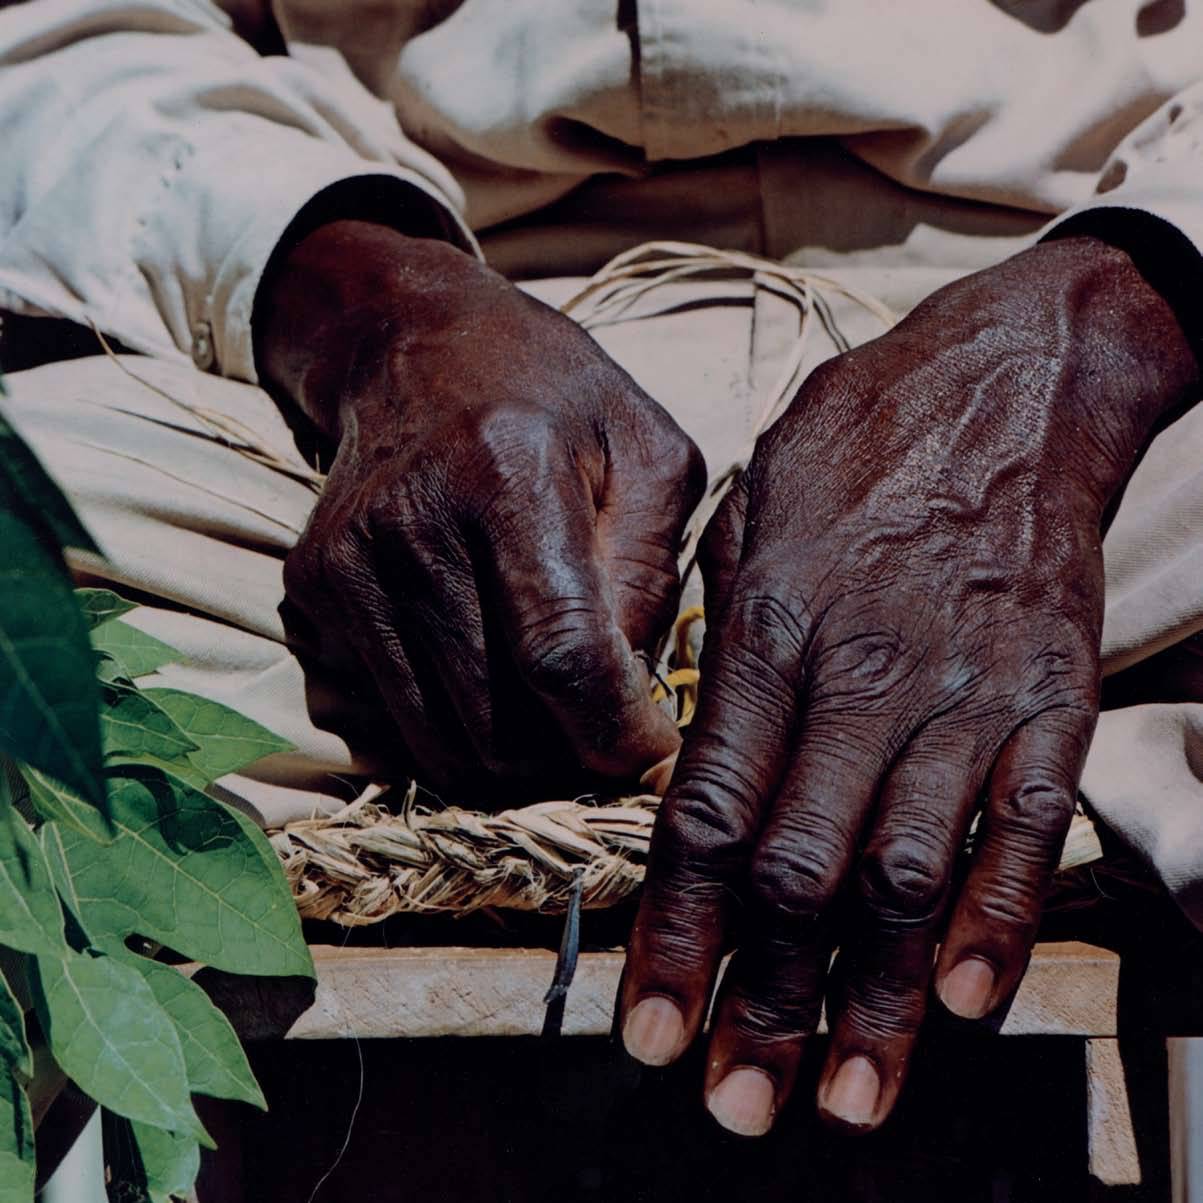 autosafari:  Hands of the Old Straw Weaver, St. Croix, Virgin Islands. 1970. Photography